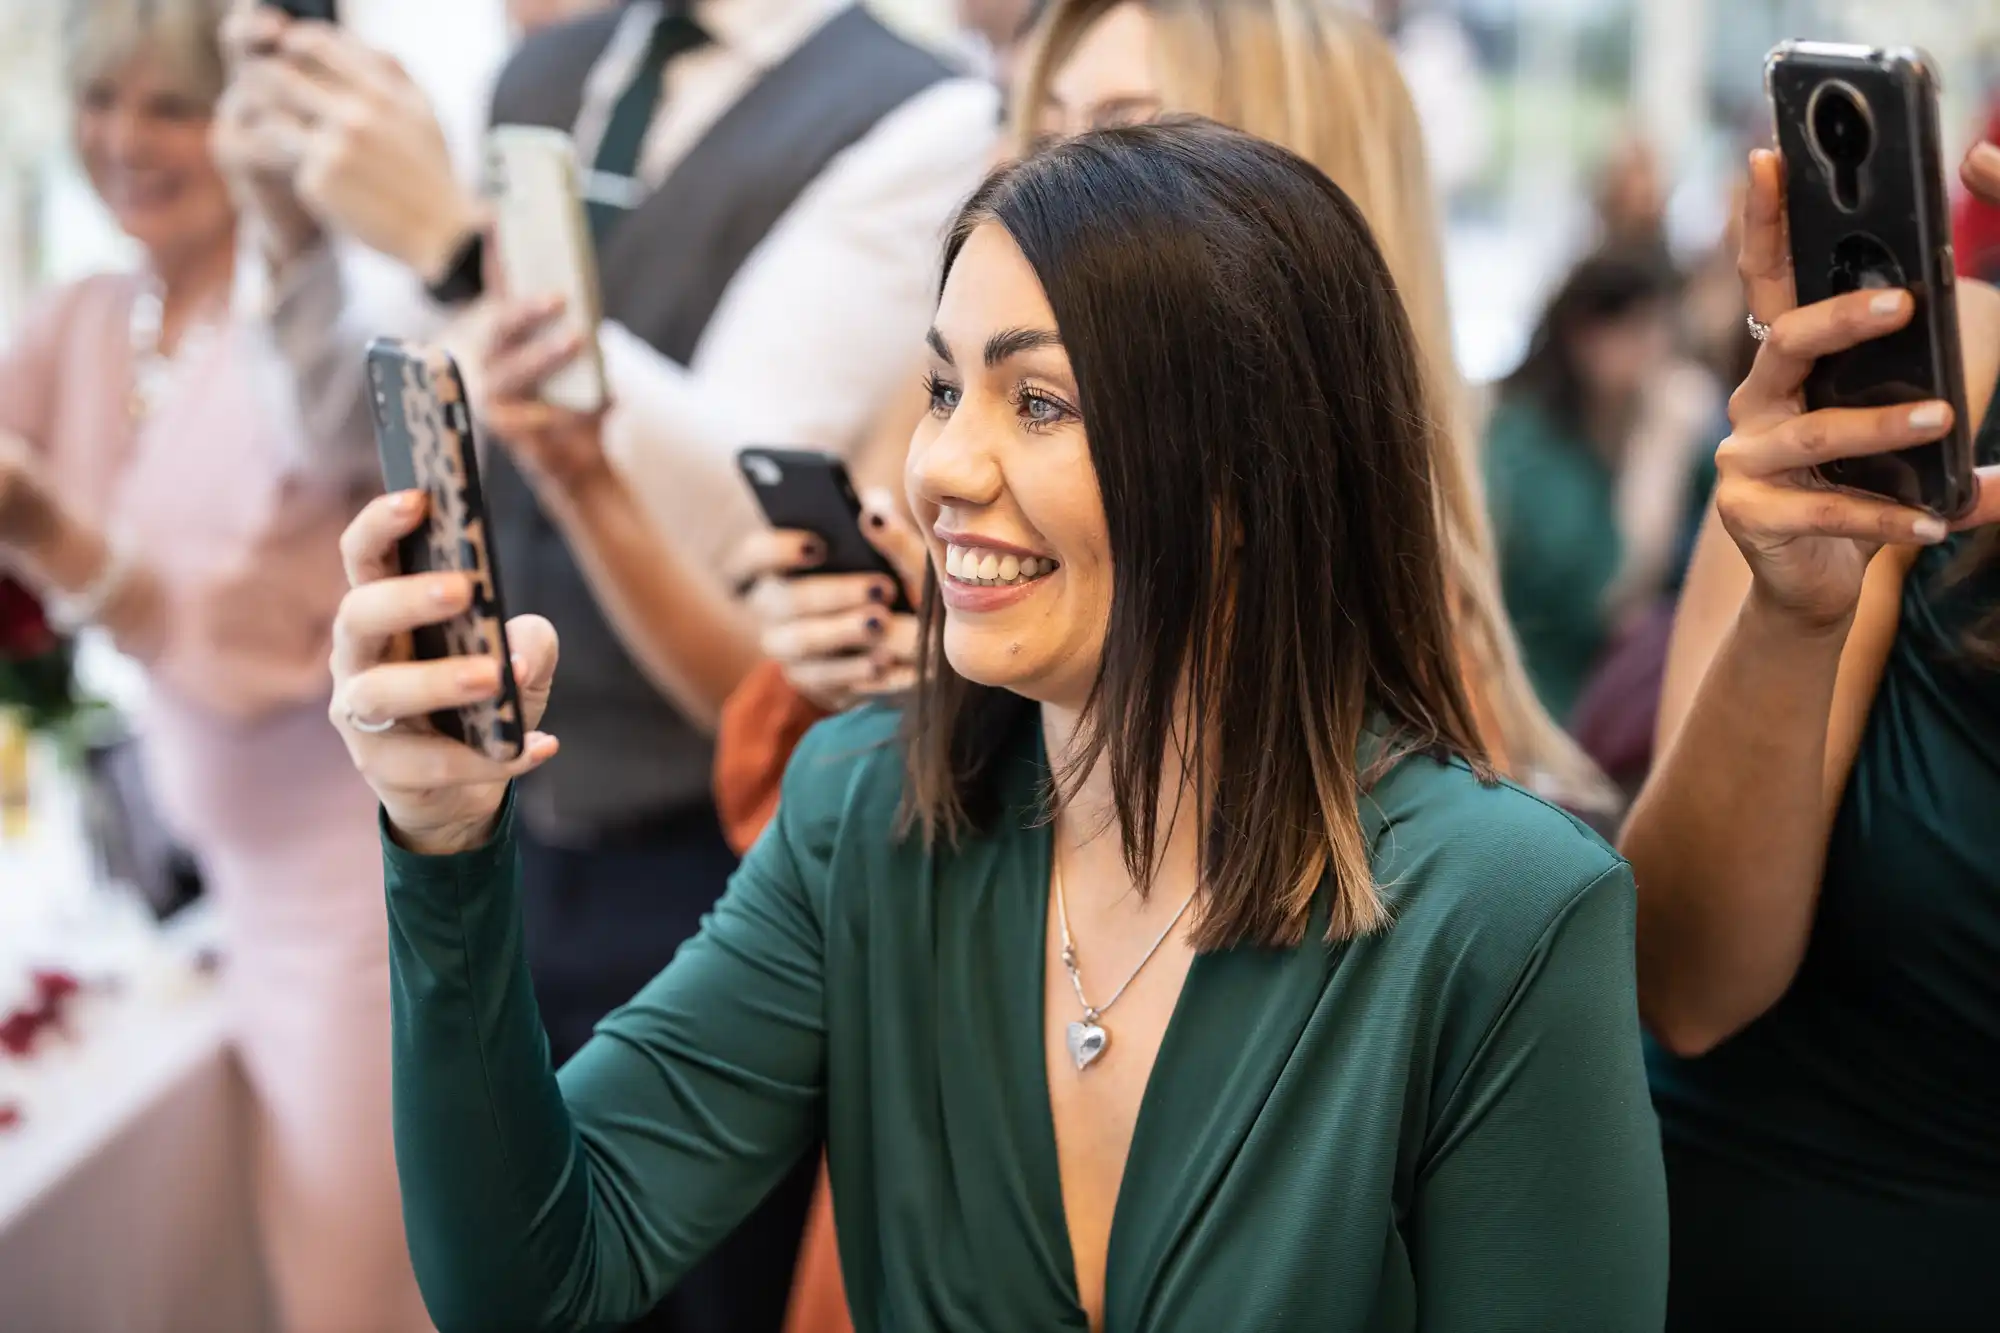 A woman in a green dress smiles while taking a photo with her phone at an event. Other people in the background are also using their phones.